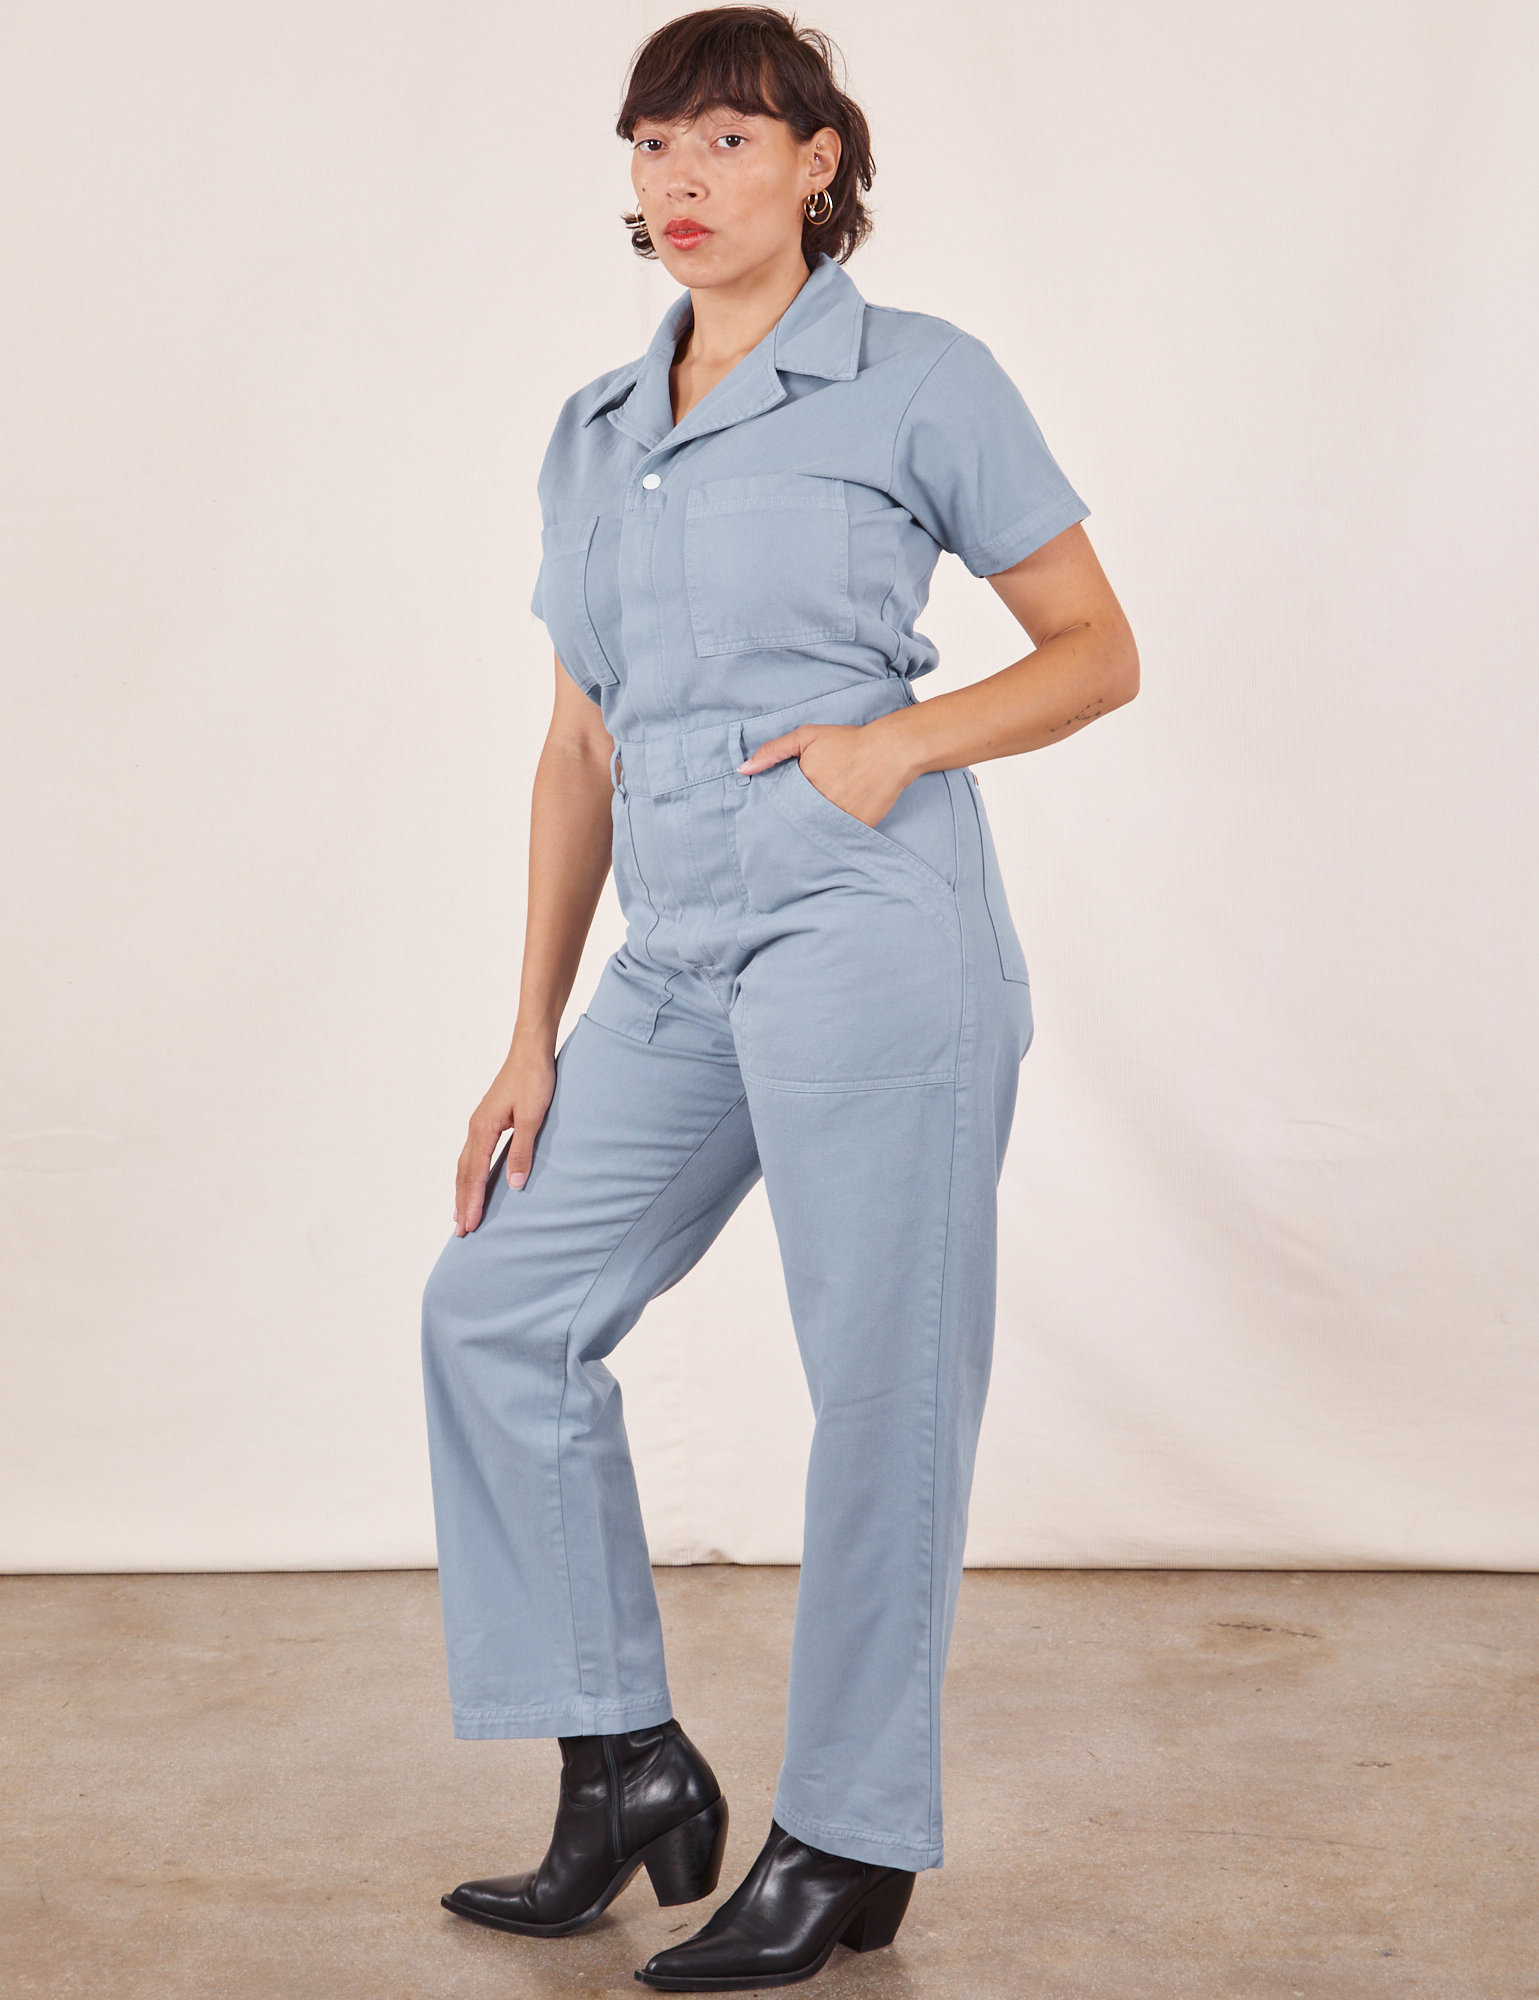 Tiara is 5&#39;4&quot; and wearing S Short Sleeve Jumpsuit in Periwinkle